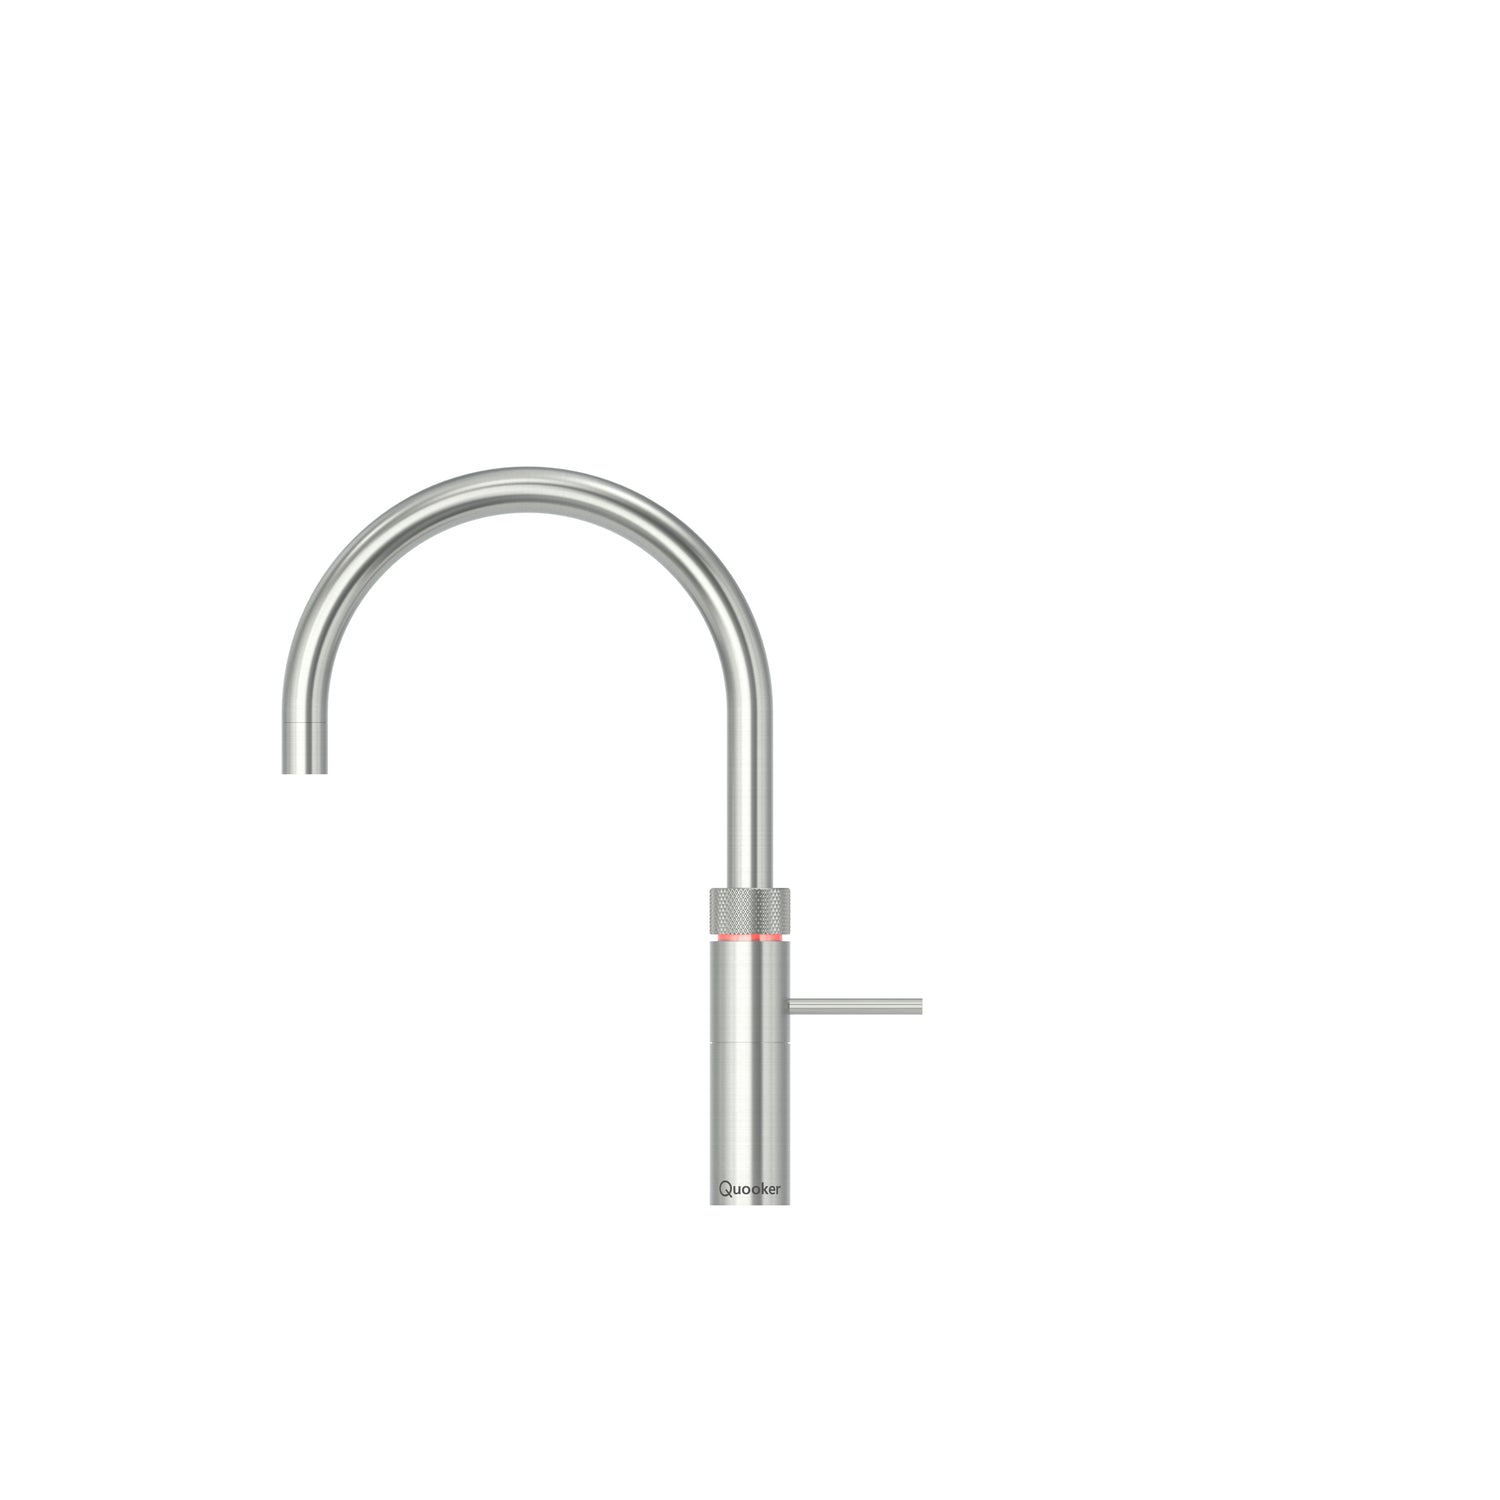 Quooker Fusion Round Tap finished in stainless steel.